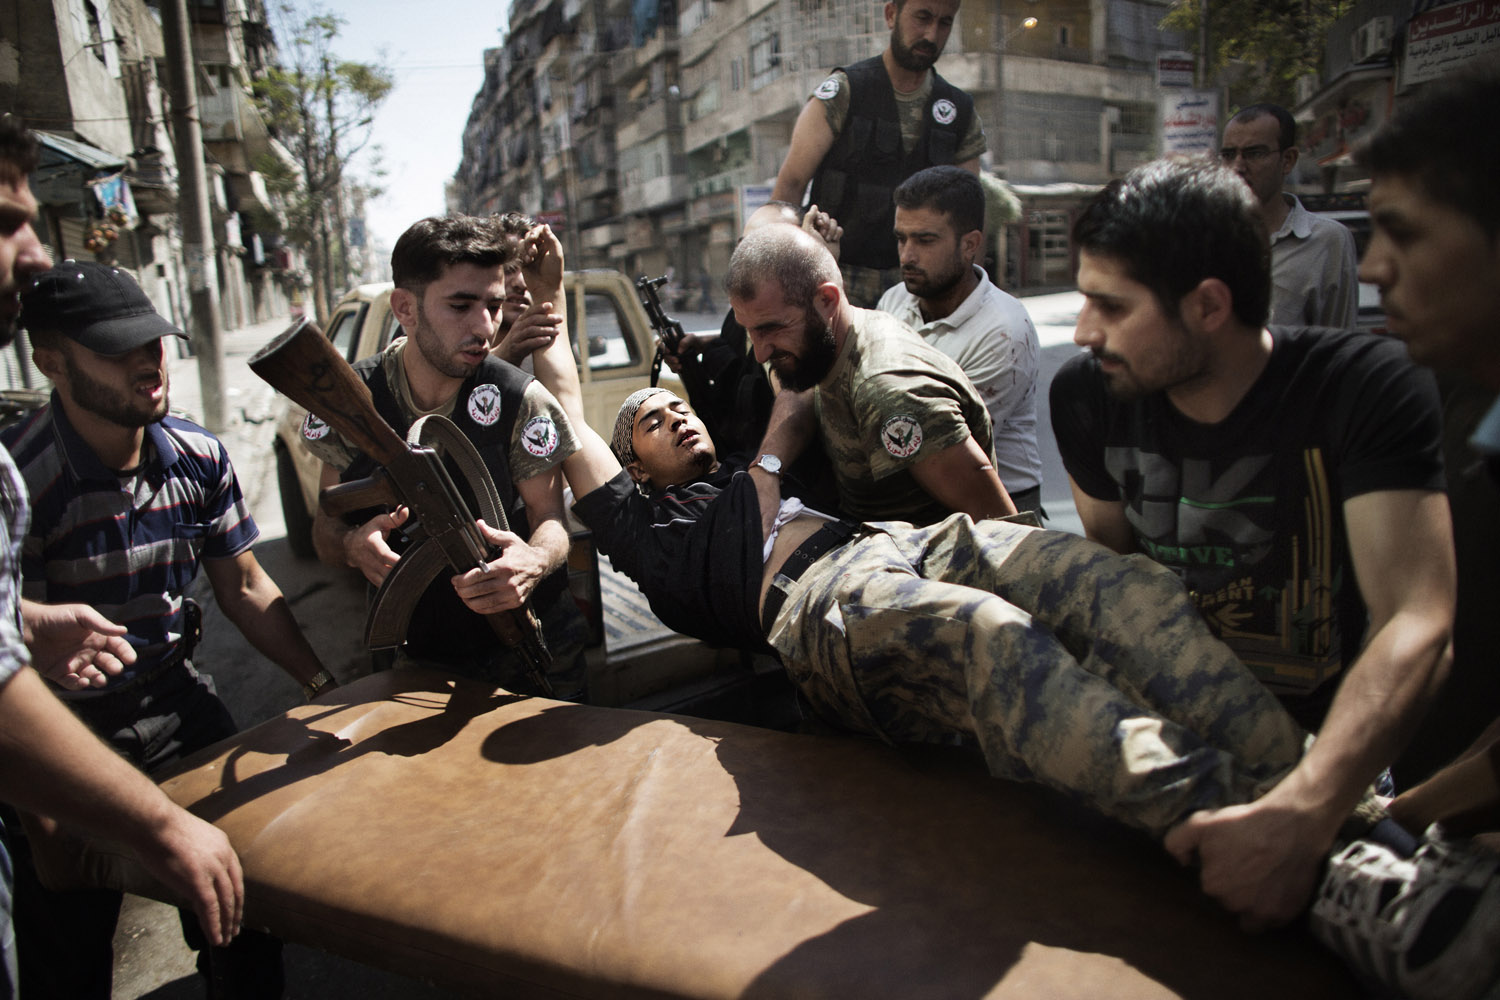 Sept. 18, 2012. Syrian rebels help a wounded comrade who survived a Syrian army strike outside a hospital in Aleppo, Syria.